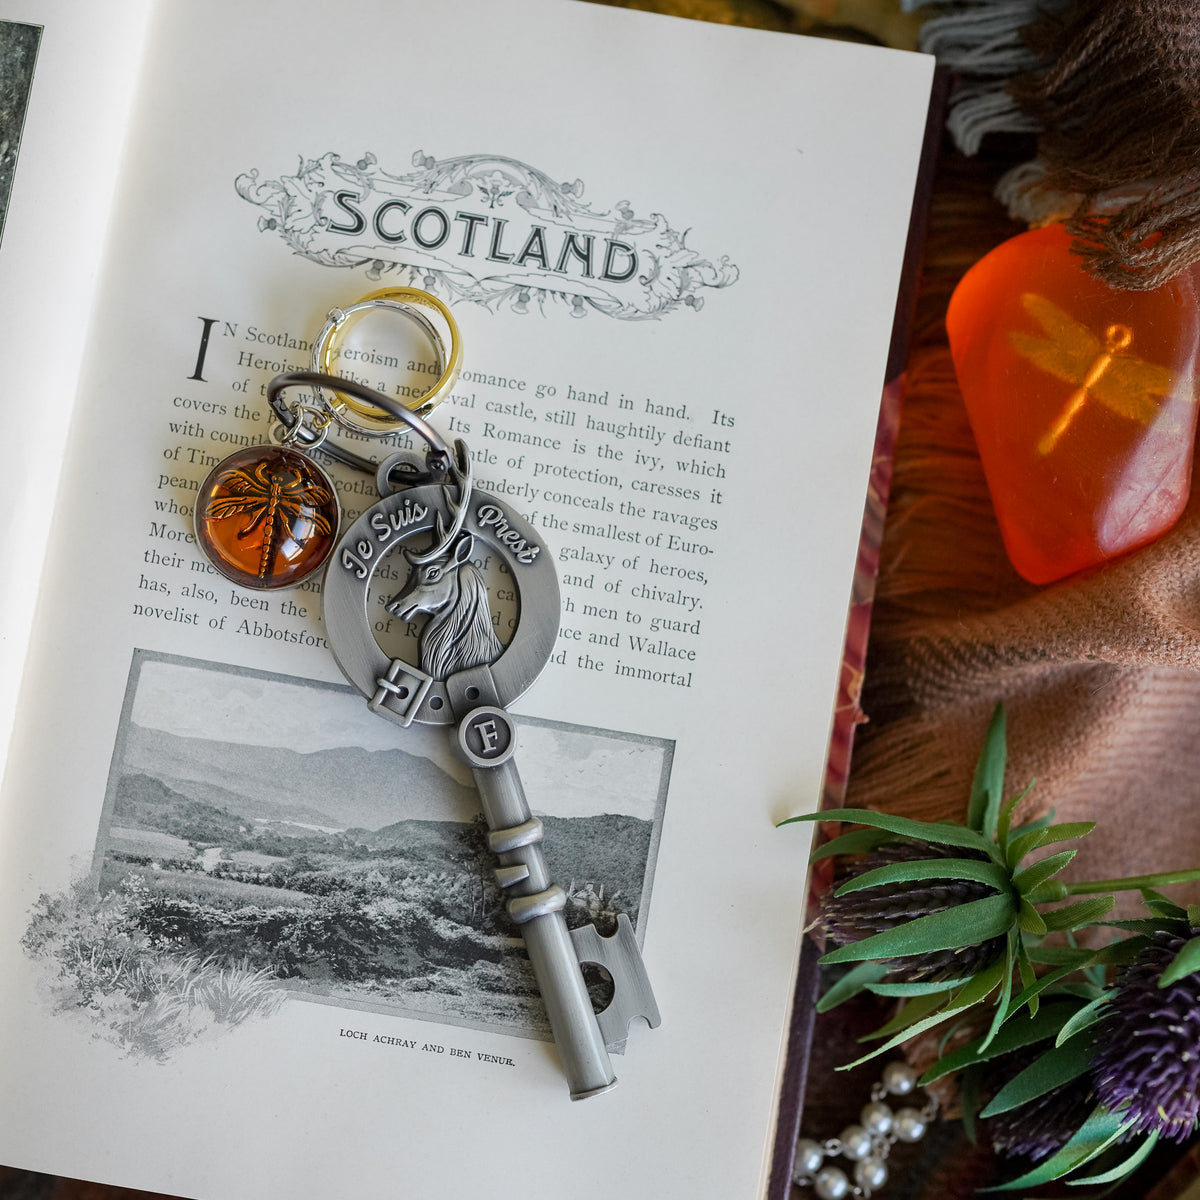 Metal Sassenach Key with the motto &quot;Je Suis Prest&quot;, and wedding ring and dragon-in-amber charms